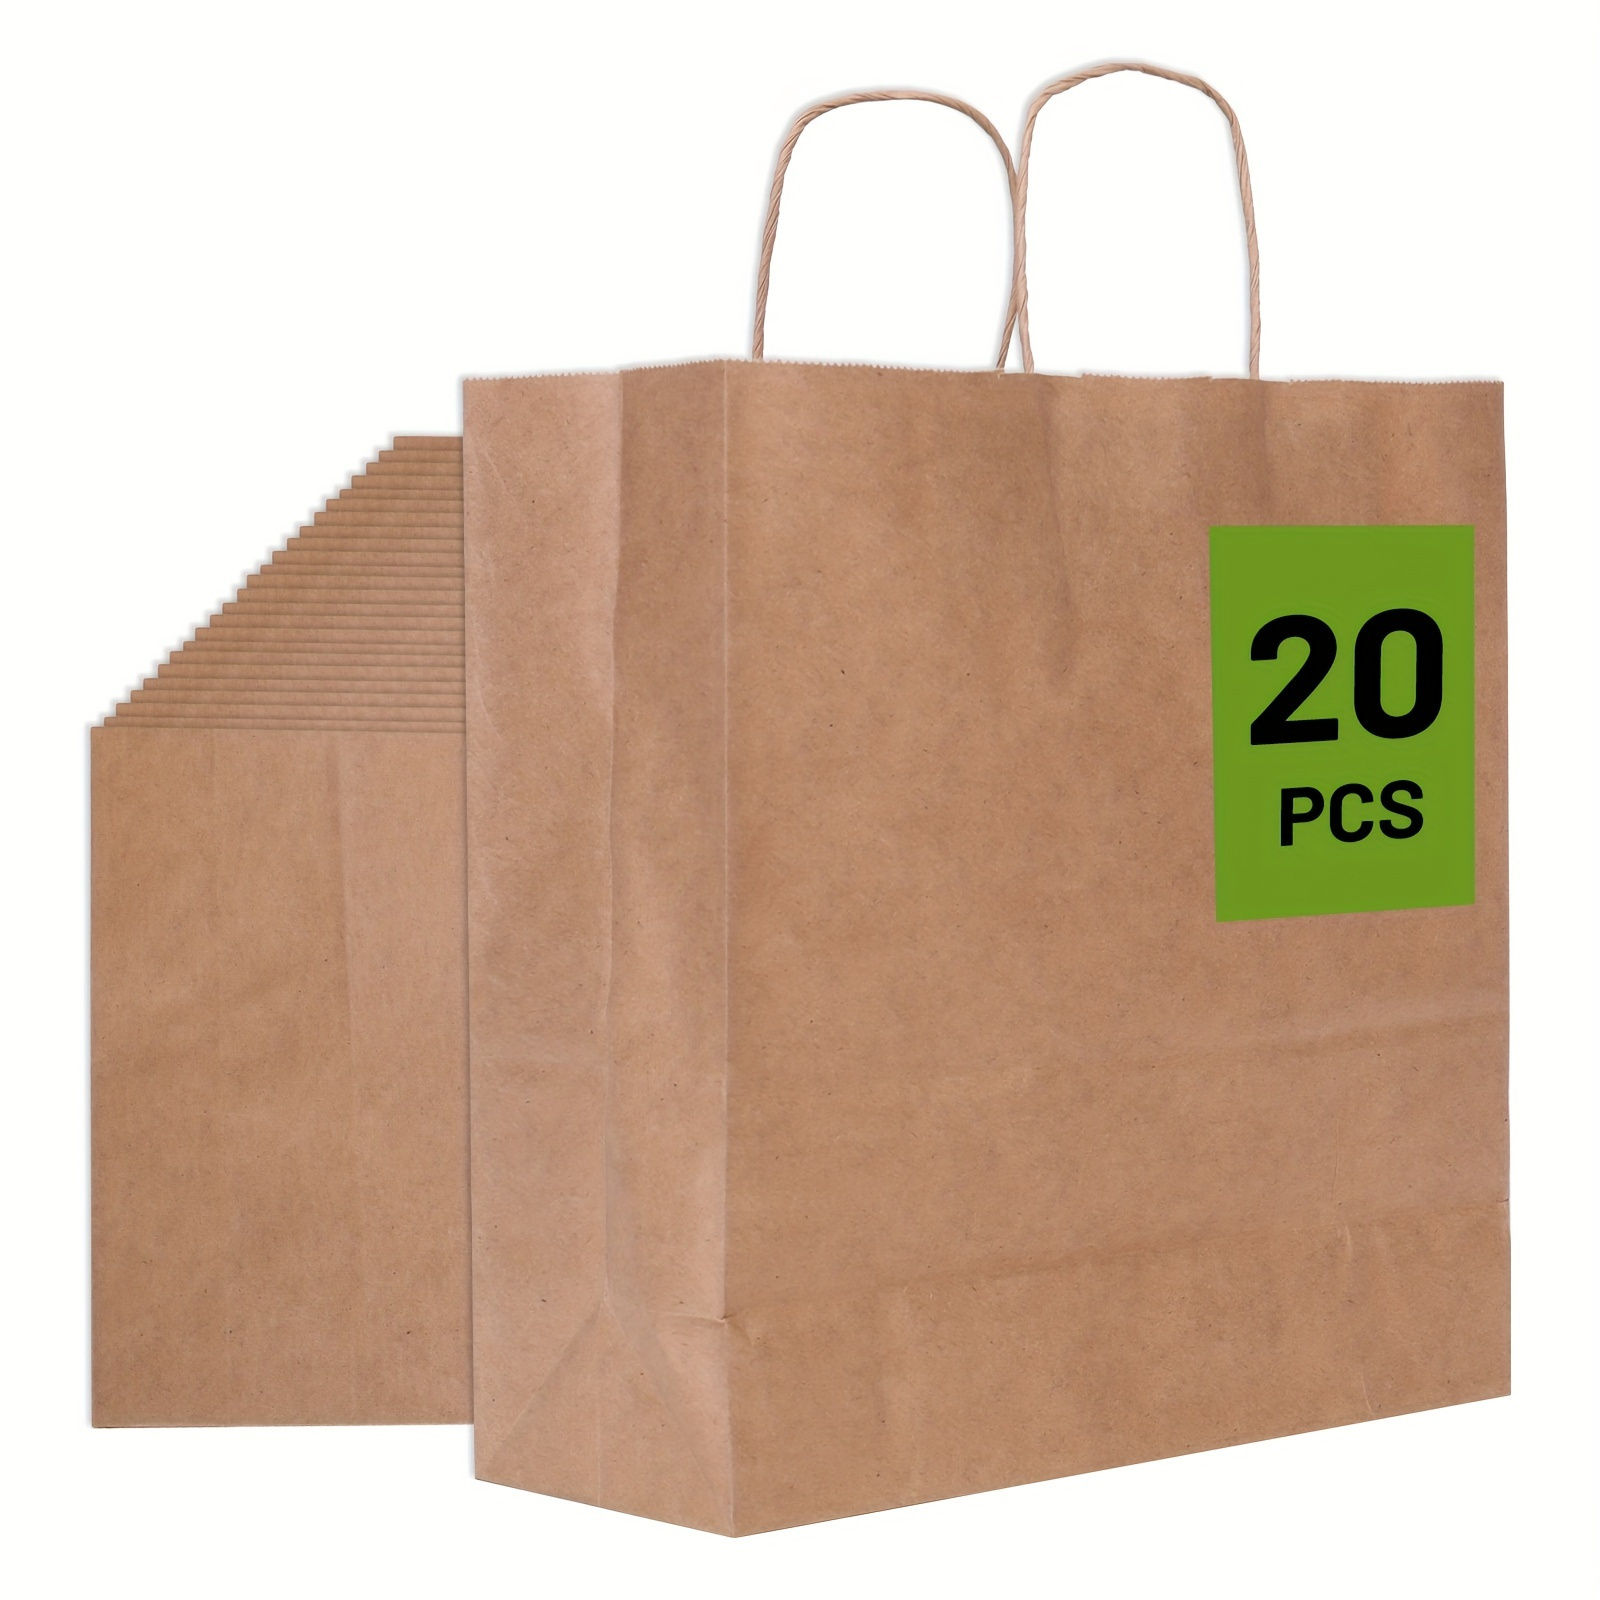 

20pcs Paper Tote Bag, Tote Bag, Gift Bag, Party Gift Bag, Paper Bag With Handles, Kraft Paper Gift Bag Cheapest Shopping Bag, Brown Carry Bag